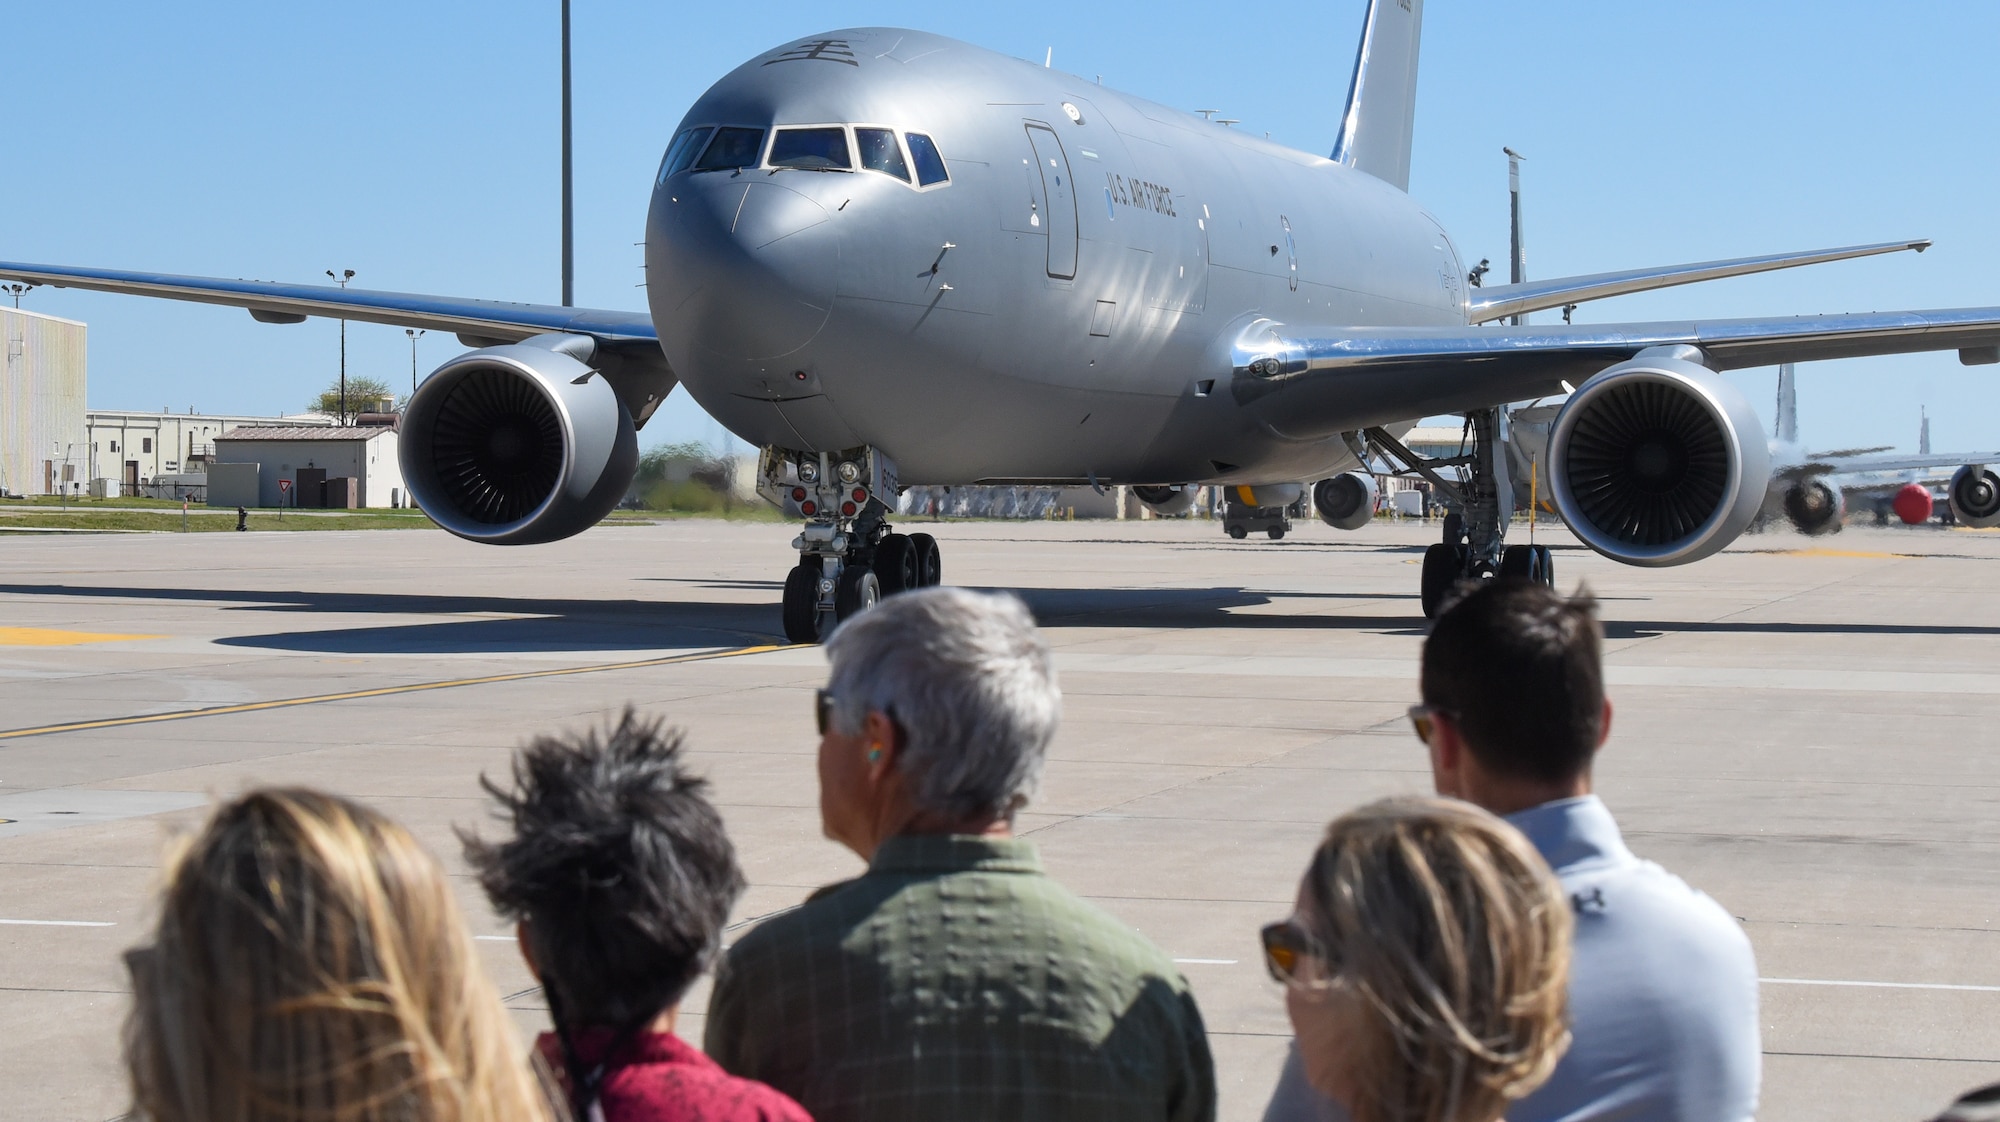 A KC-46A Pegasus taxis from the runway April 20, 2019, at McConnell Air Force Base, Kan. This is the fifth KC-46 to be delivered to McConnell. It is the first Pegasus delivery to have an aircrew composed of both active duty and reserve pilots from the 22nd and 931st Air Refueling Wings. (U.S. Air Force photo by Airman 1st Class Alexi Myrick)